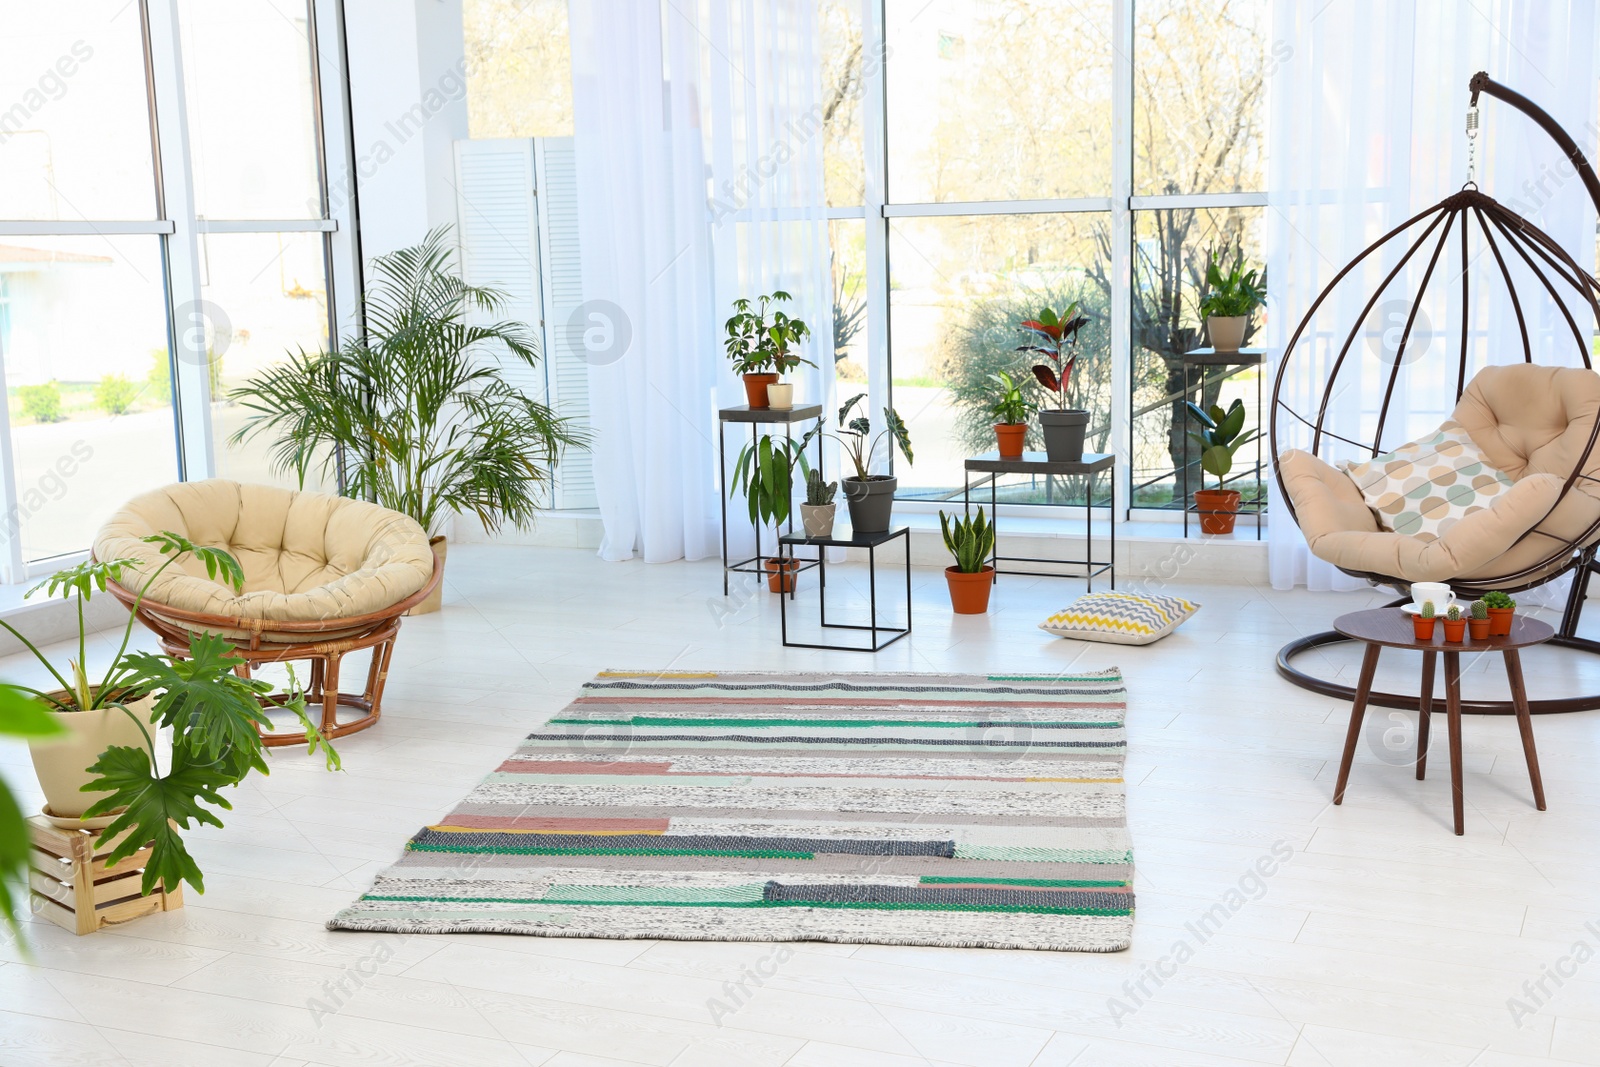 Photo of Living room interior with indoor plants, swing and papasan chairs. Trendy home decor